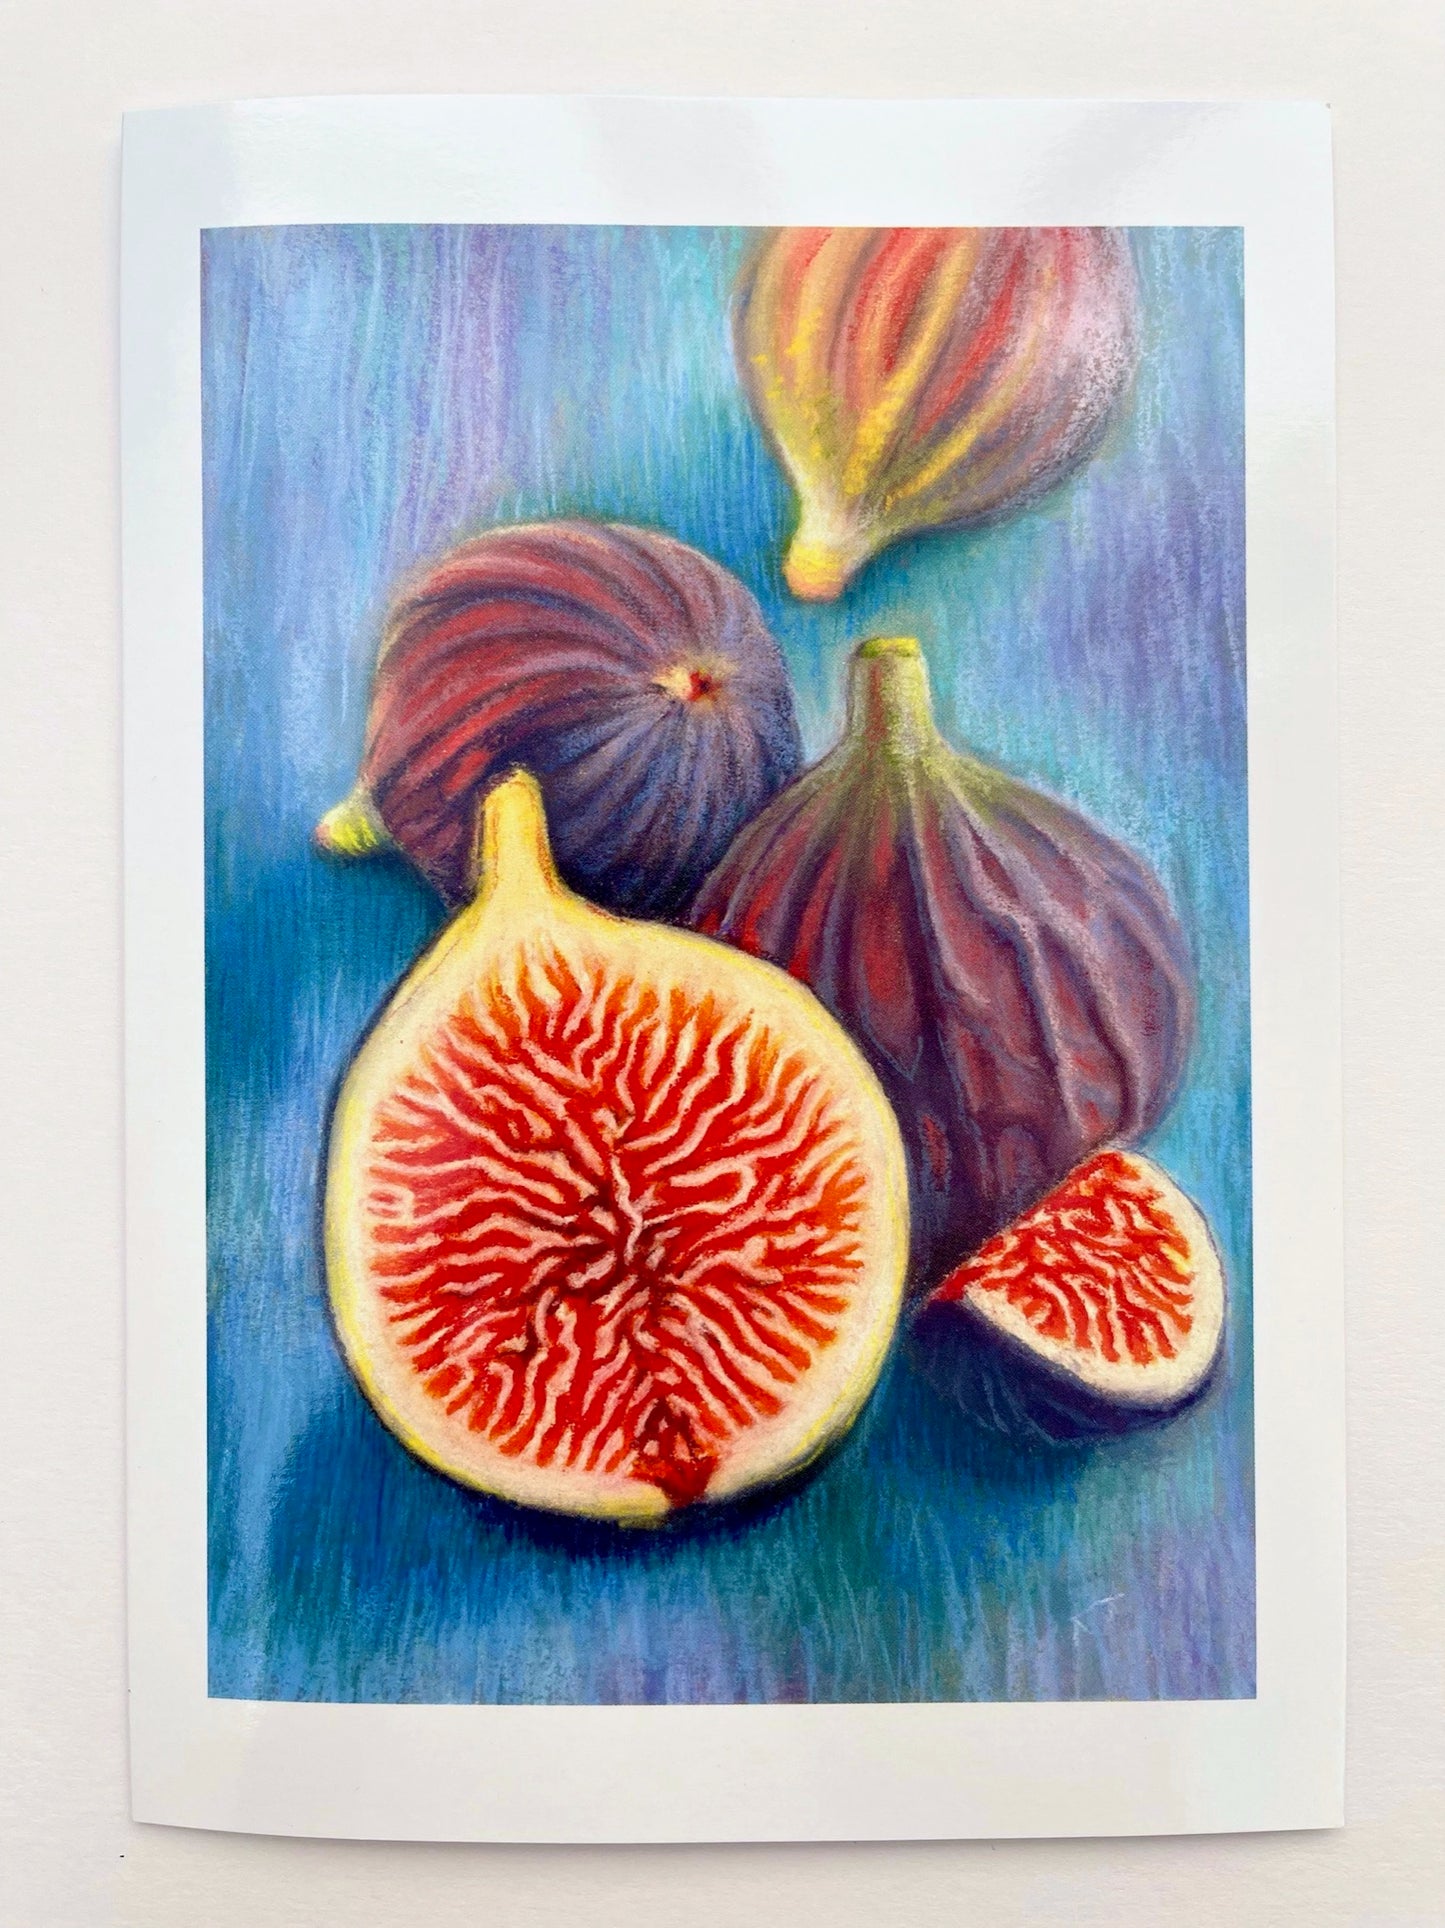 A pastel still life of several figs, depicted as whole and sliced. The vibrant, bright colours of their flesh contrasting with the muted tones of their skins are set against the turquoise and mauve background.